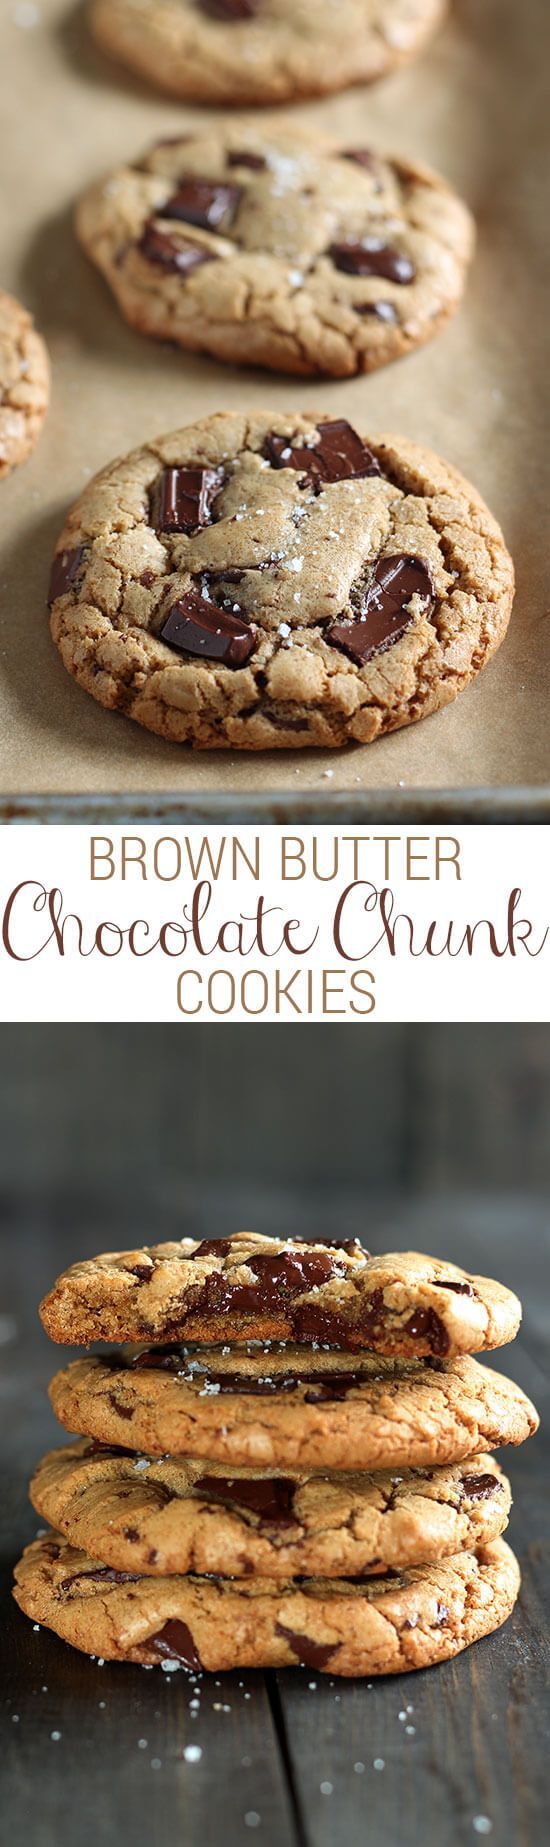 If you like CHEWY and tons of flavor in your cookies – this is the recipe for you! No mixer required and no chilling!